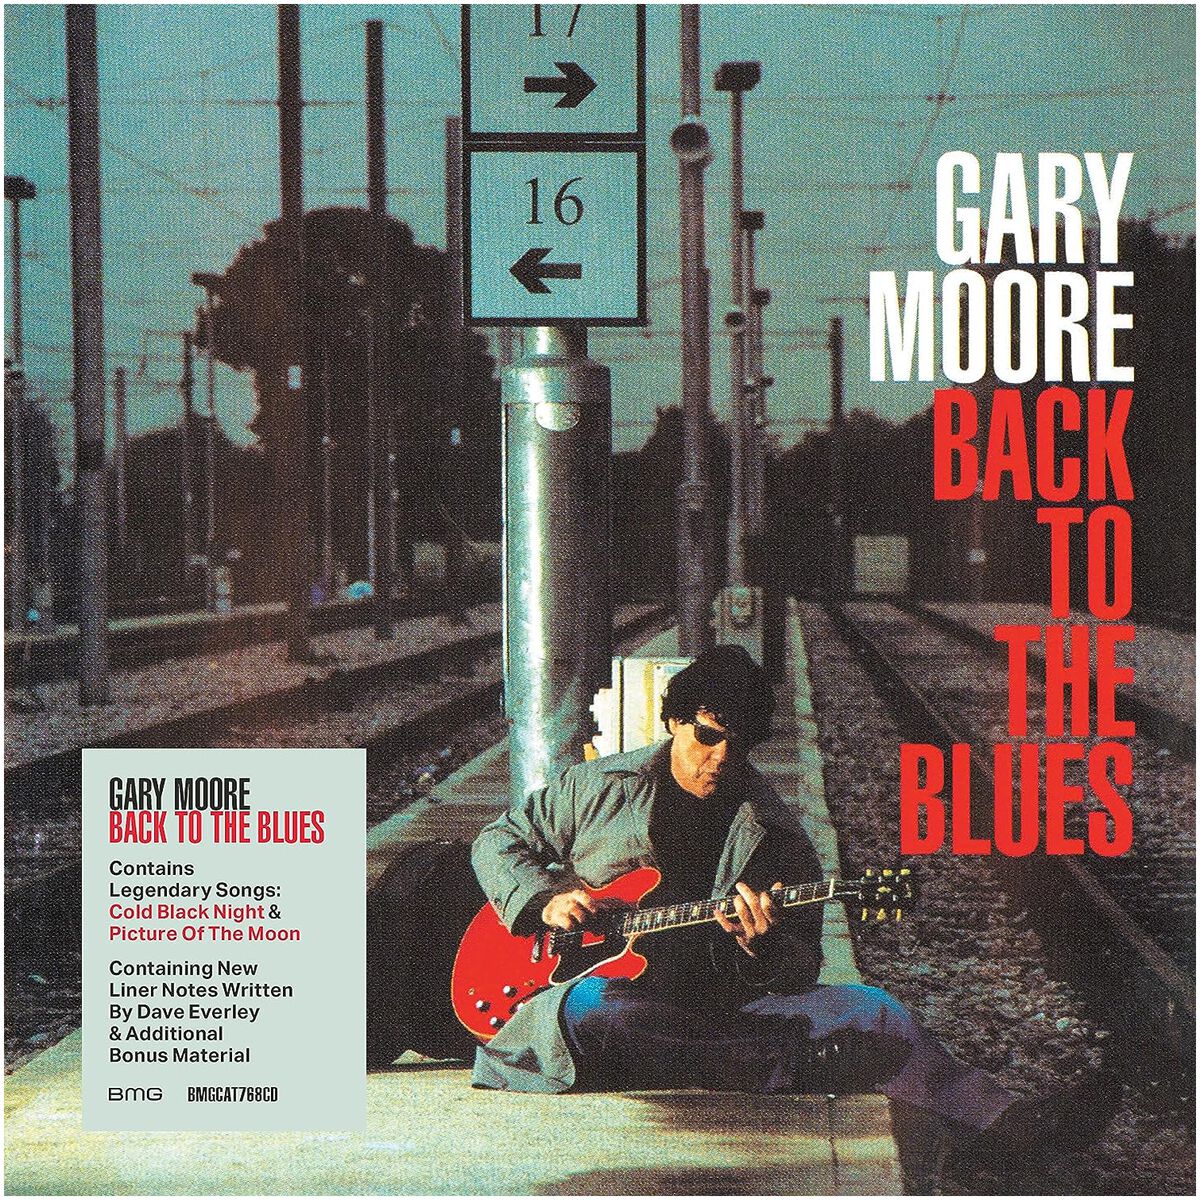 Gary Moore Back to the blues CD multicolor